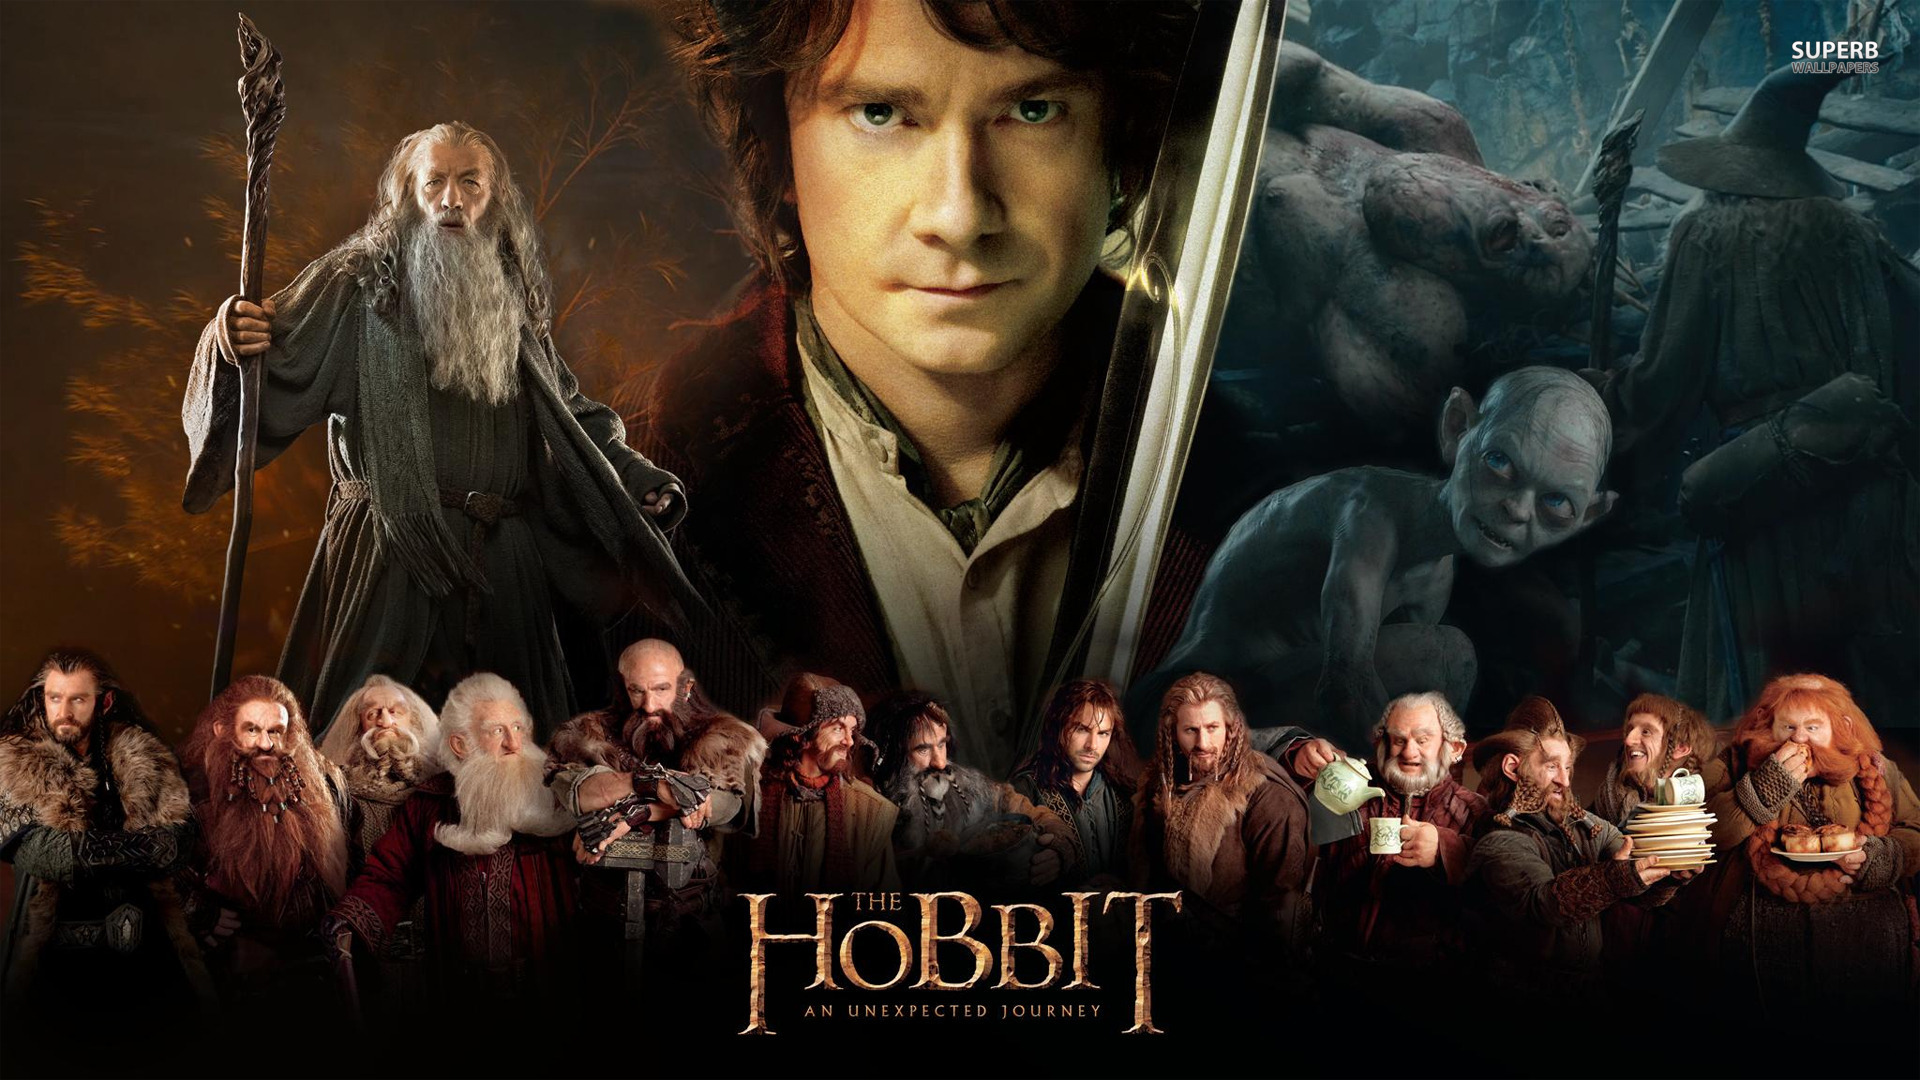 The Hobbit: An Unexpected Journey #1